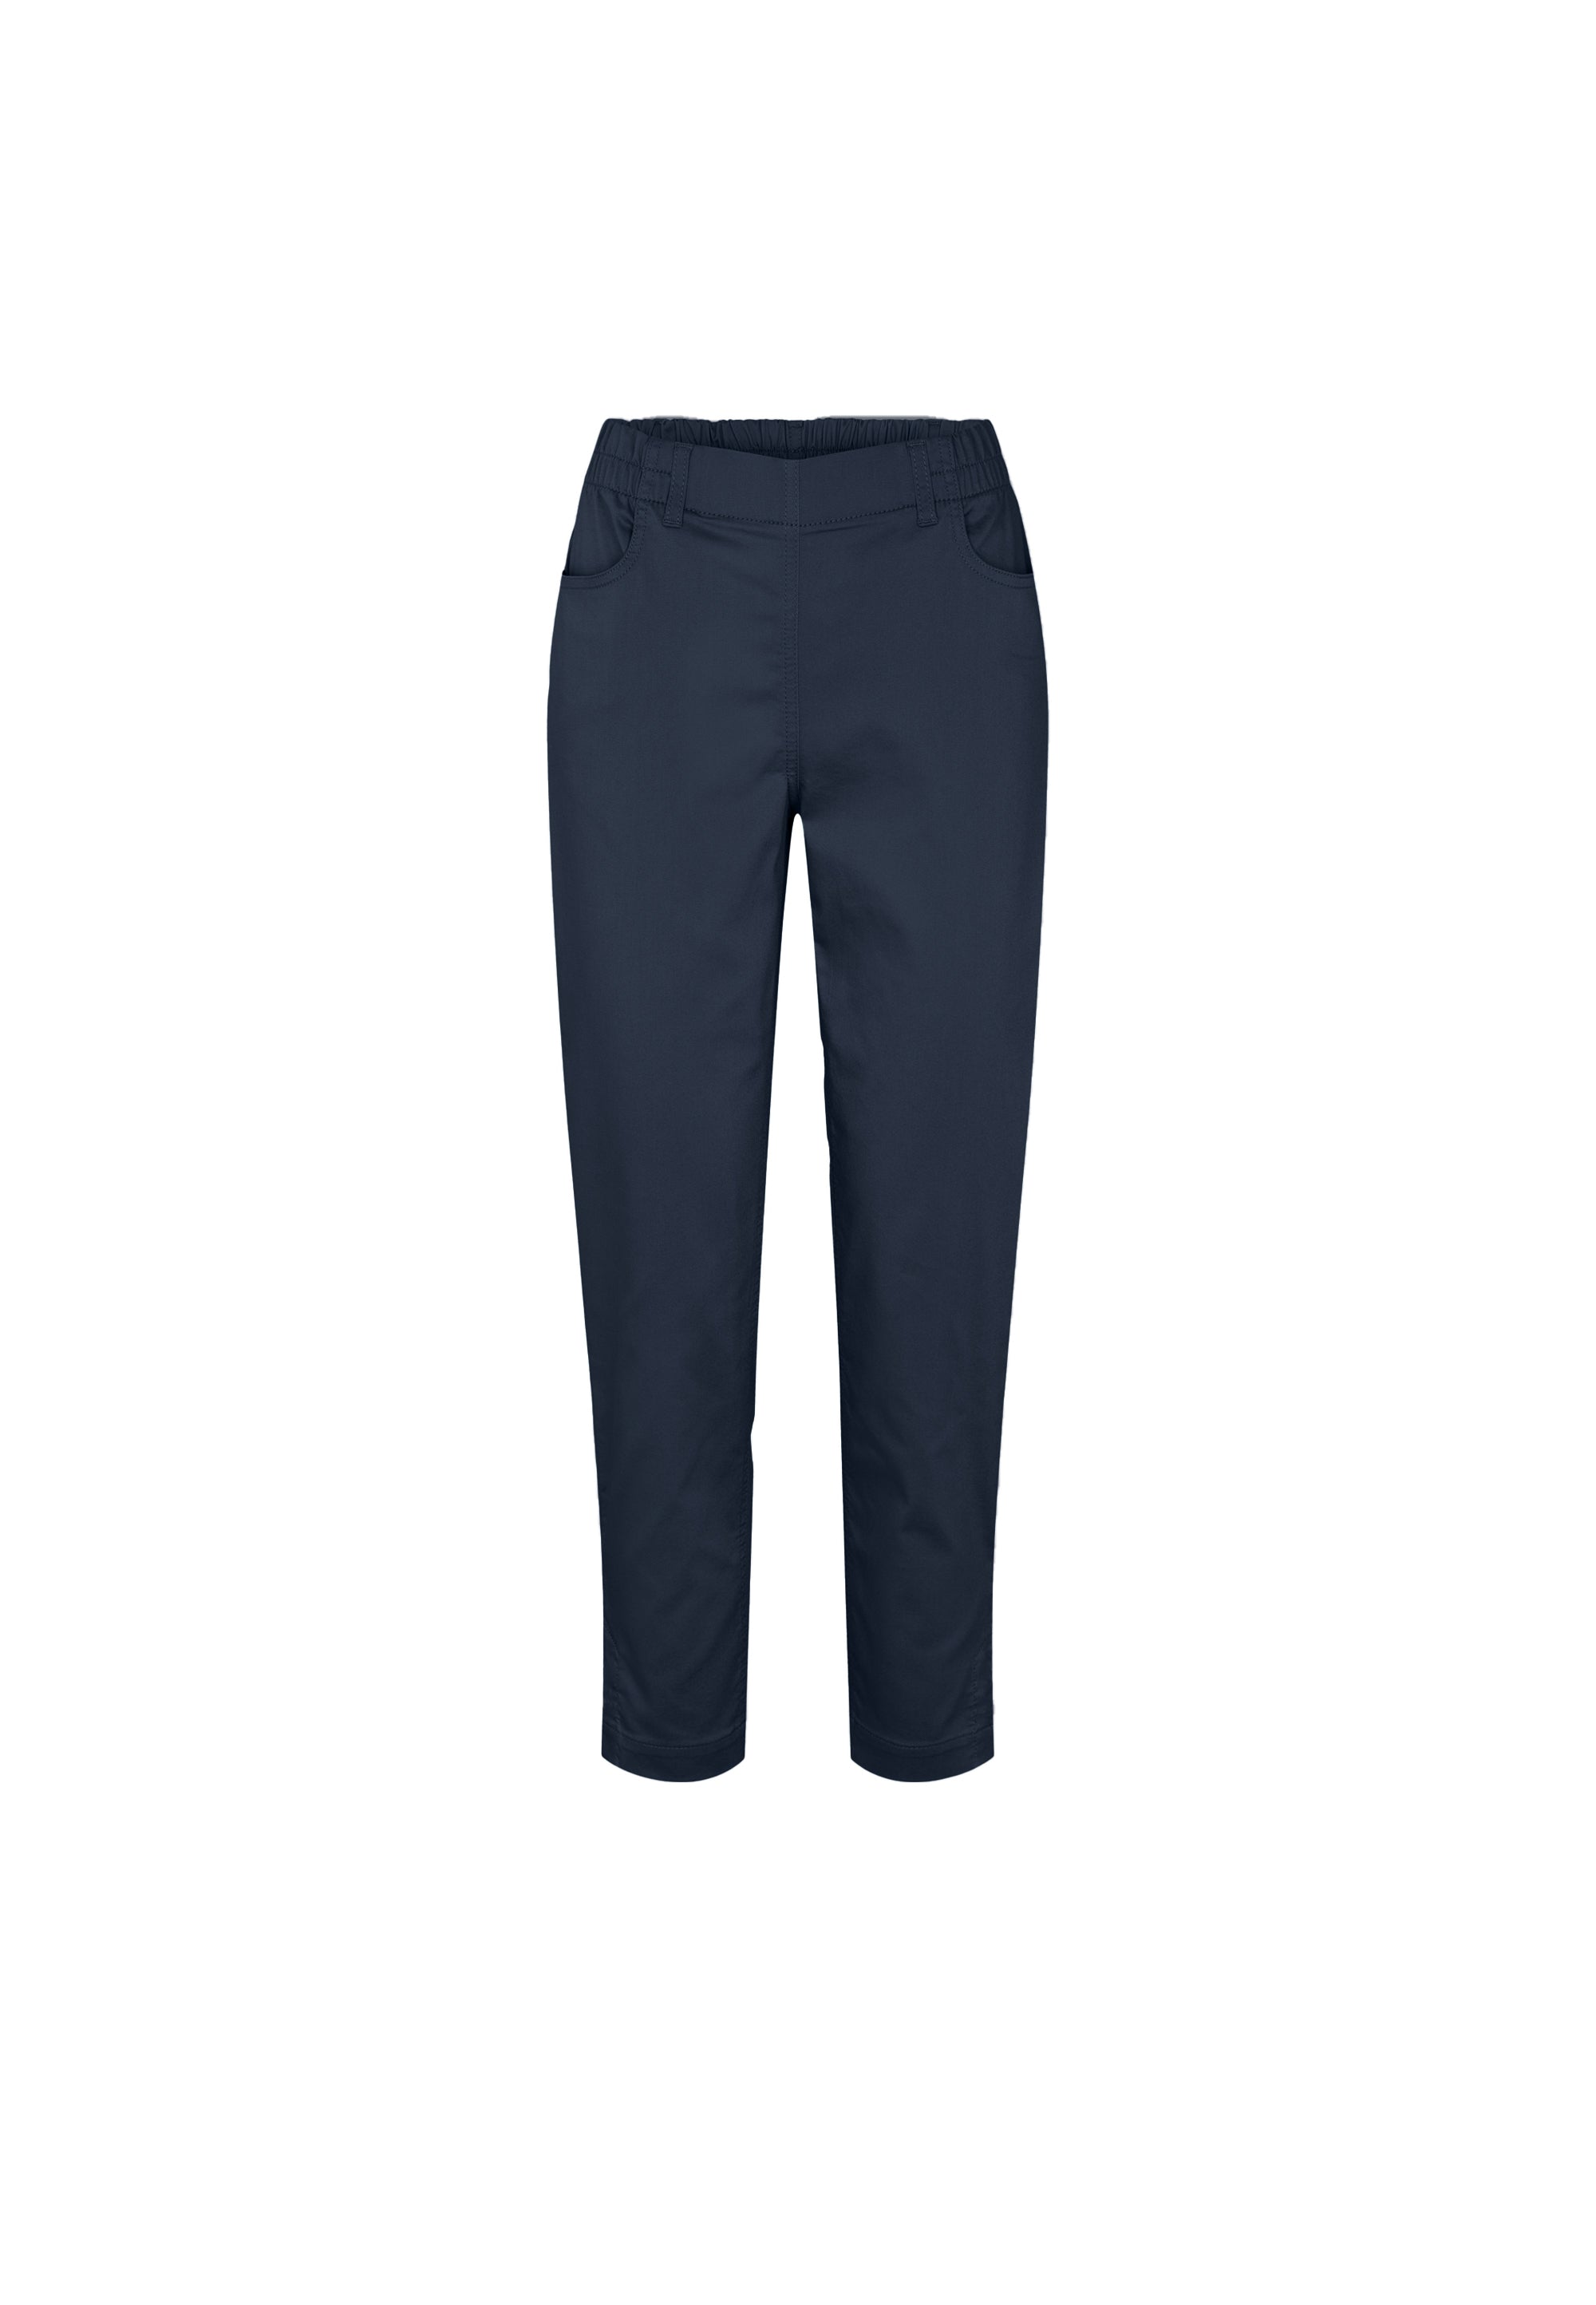 LAURIE  Ellie Relaxed - Extra Short Length Trousers RELAXED 49000 Navy